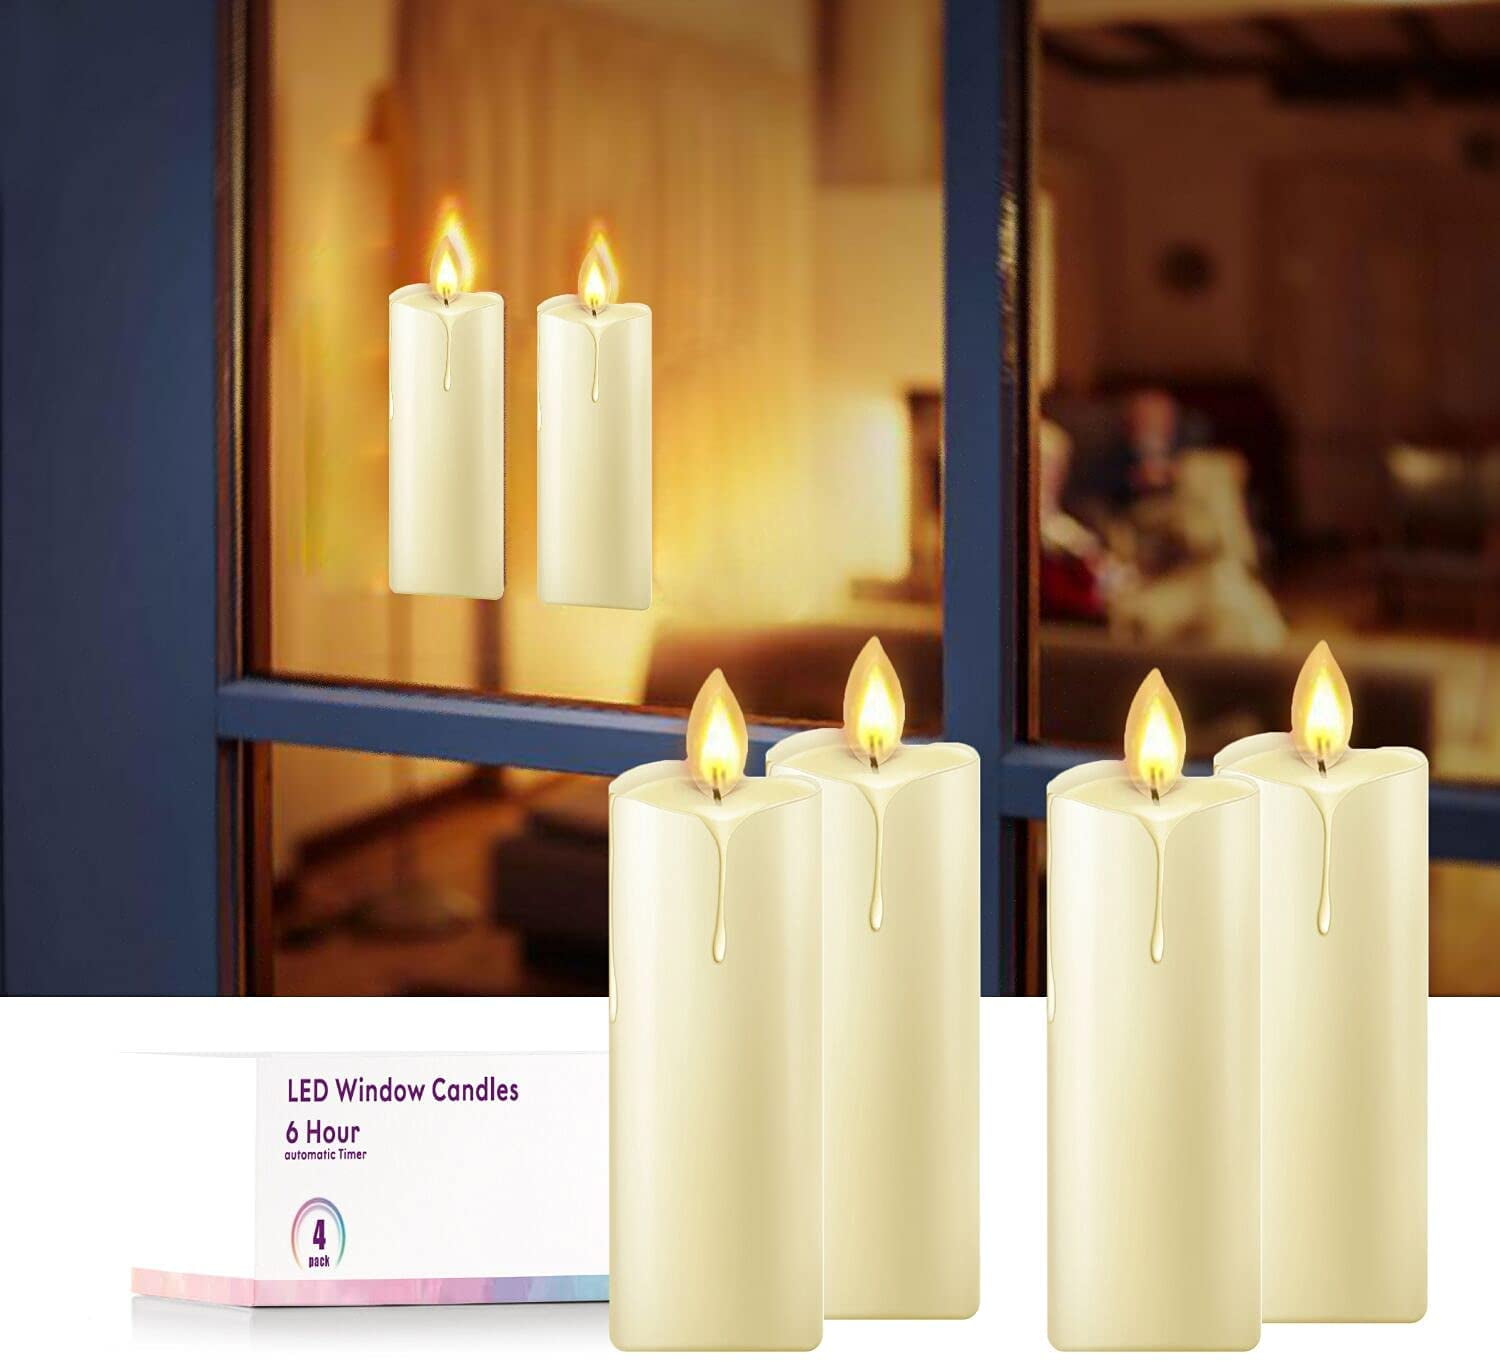 LED Candles Tea Light Taper Pillar Battery No Flame Safety Holiday Home Decor 